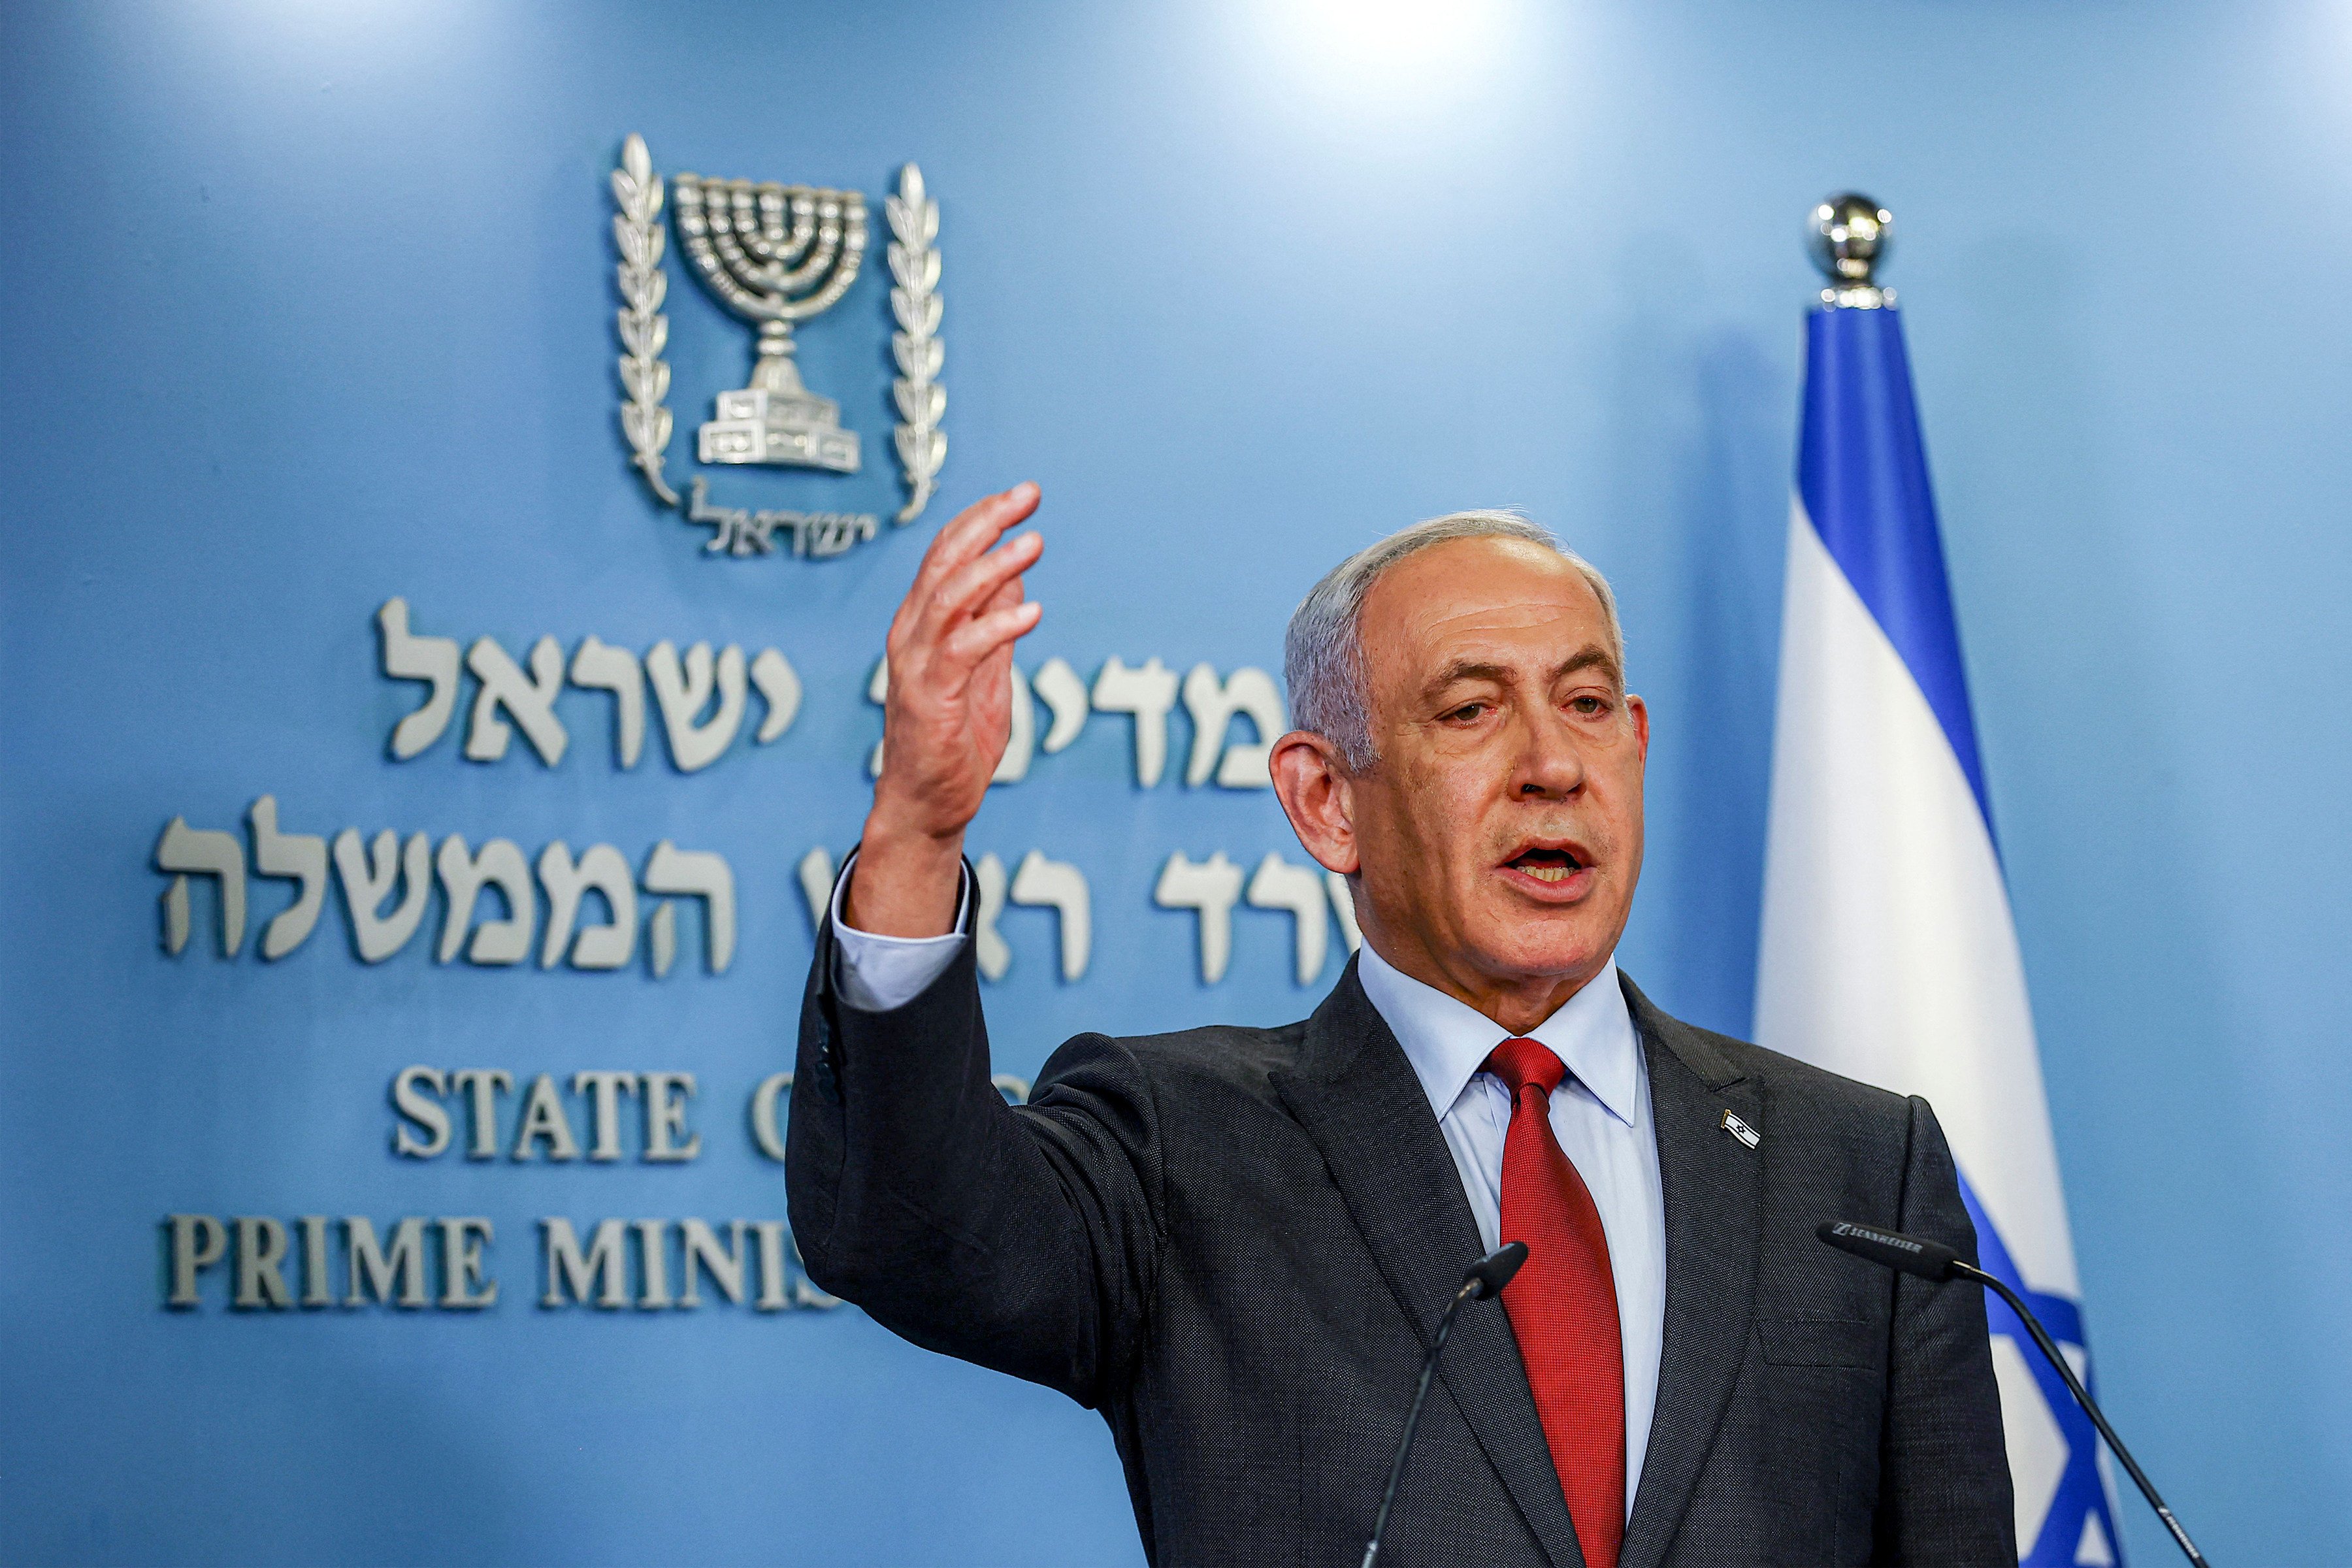 Israeli Prime Minister Benjamin Netanyahu ruled out releasing Palestinian prisoners as part of any deal to halt fighting in Gaza. Photo: TNS